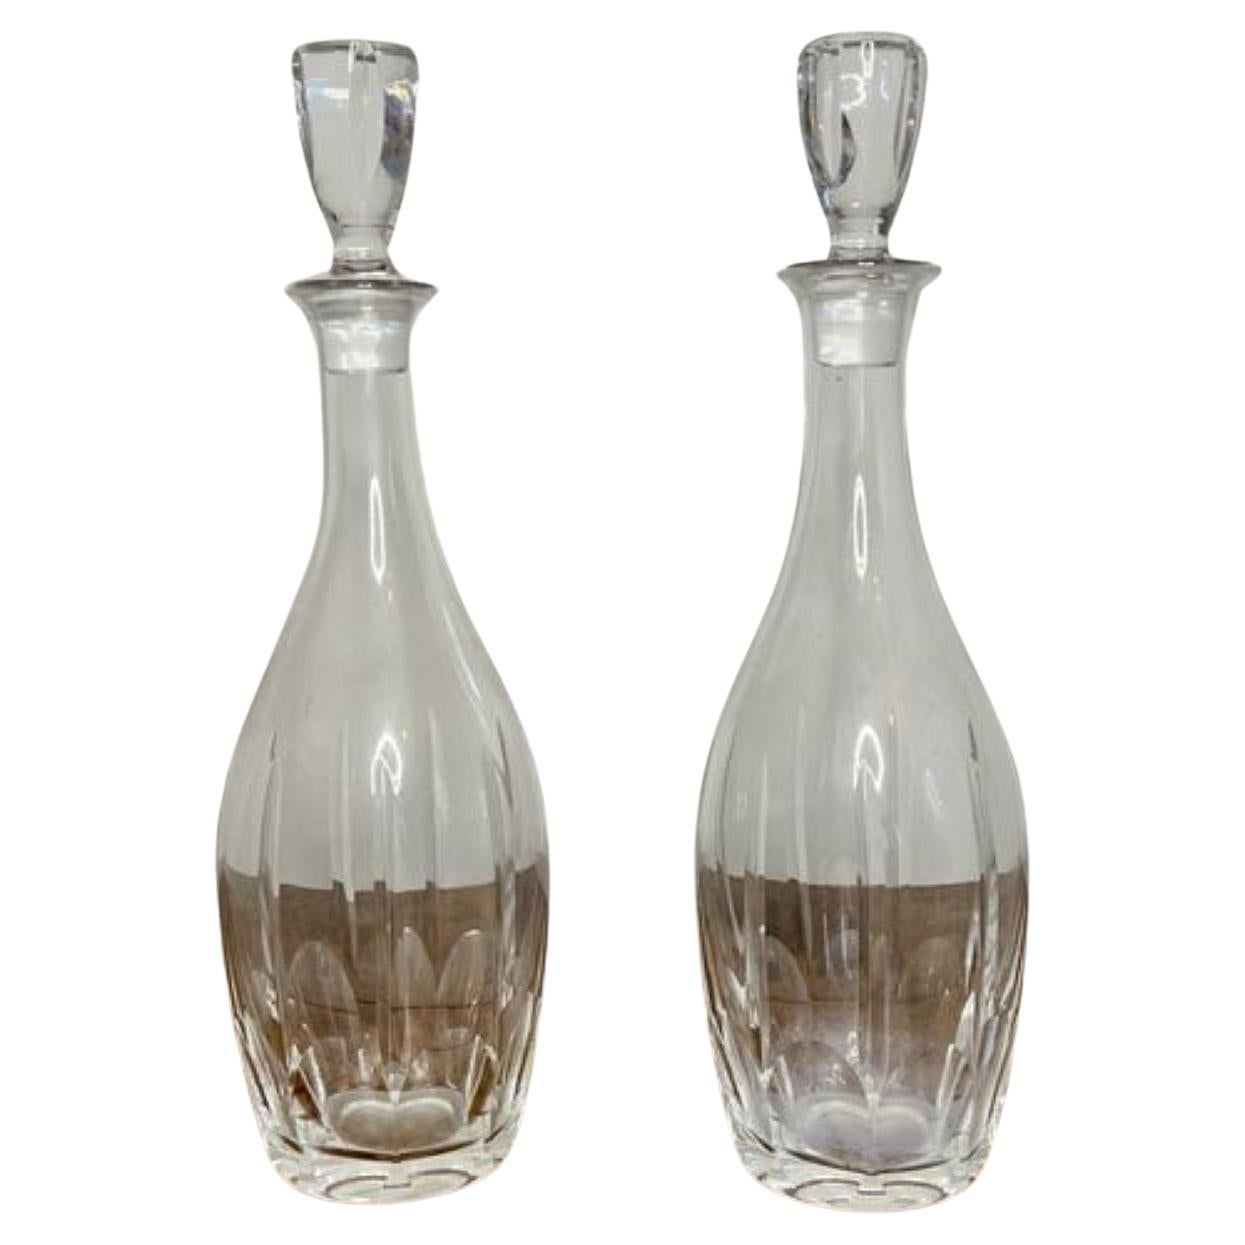 Fine pair of antique Edwardian glass decanters  For Sale